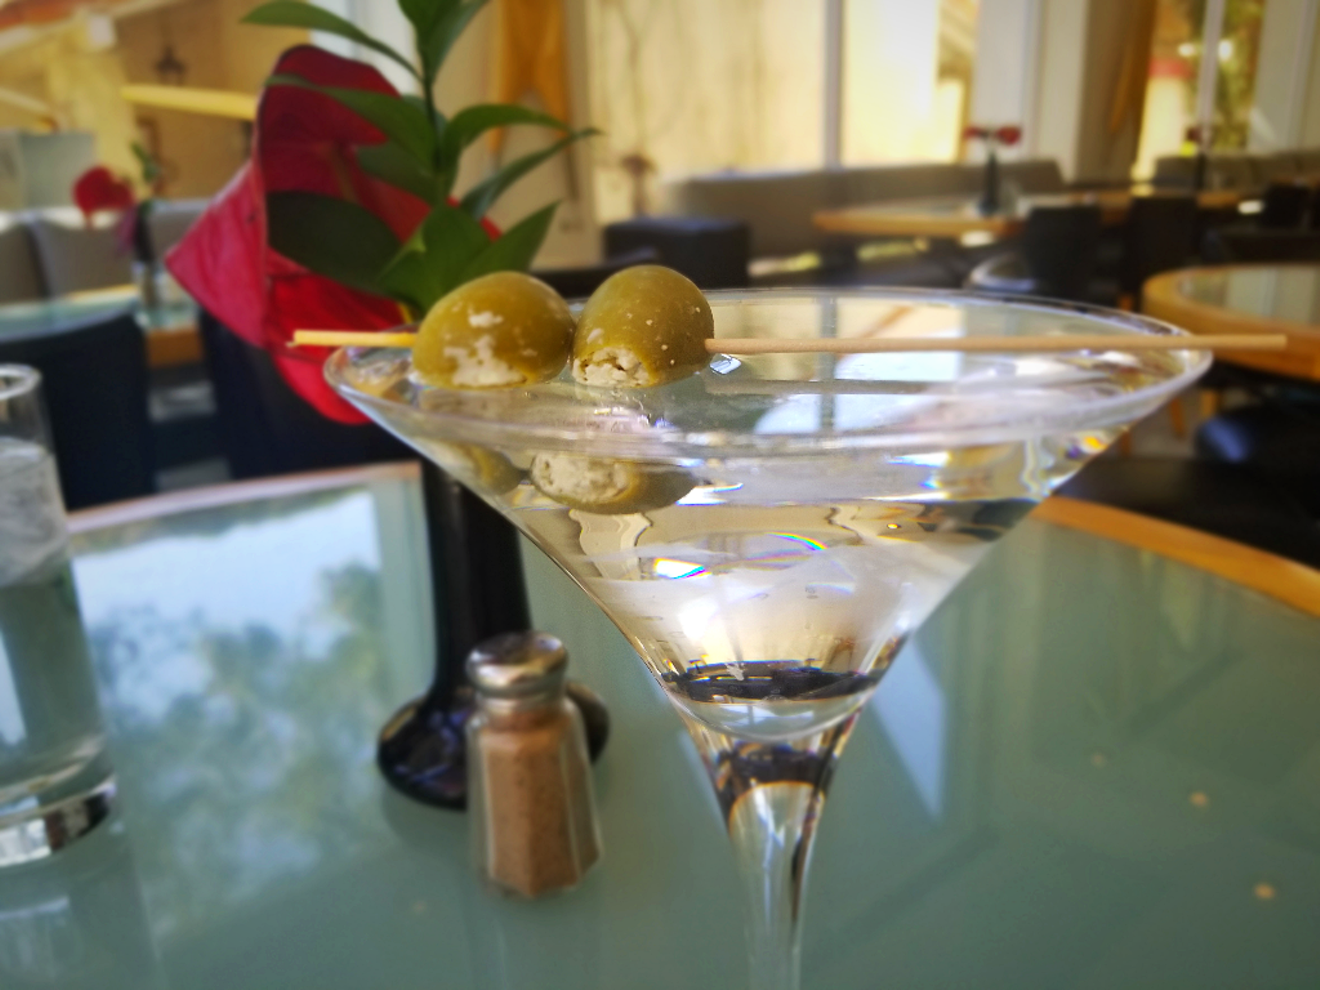 Martinis are served until 1:30 a.m. daily at this Old Town Scottsdale institution.